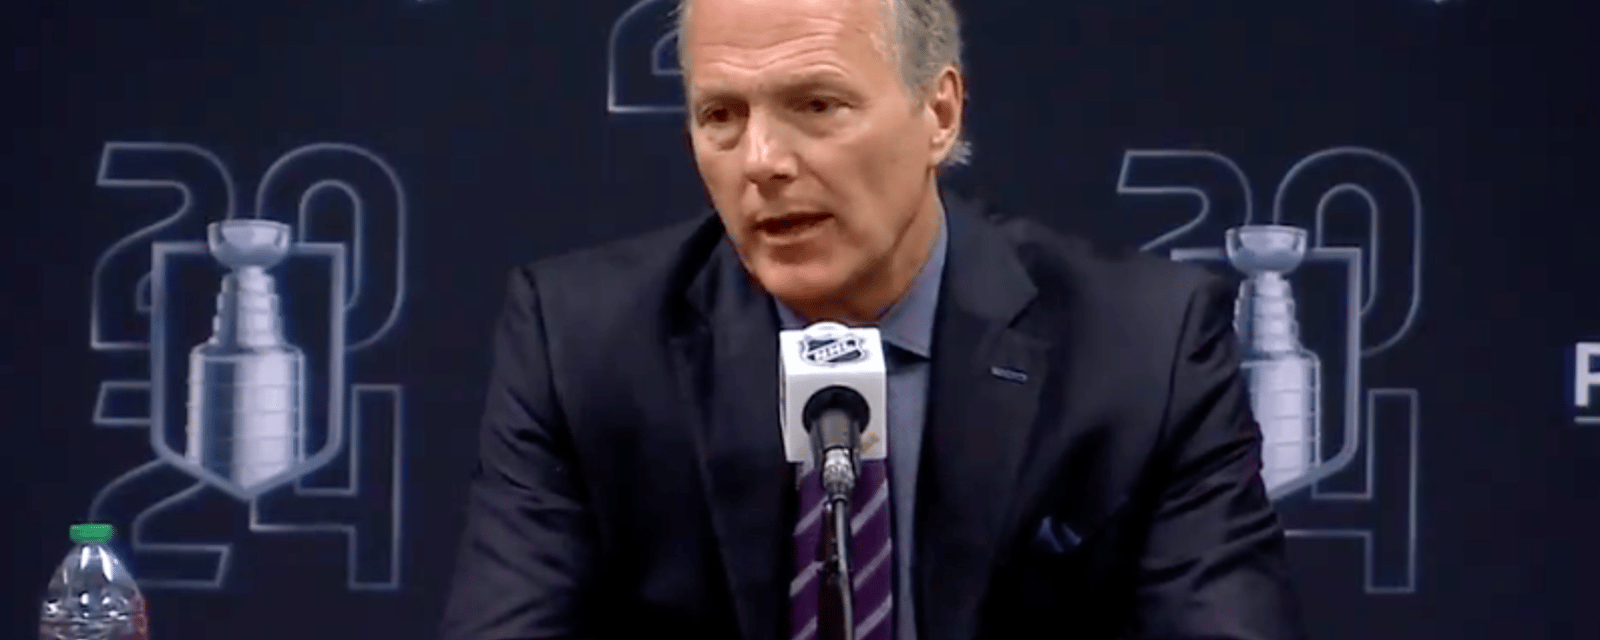 Jon Cooper issues apology for controversial postgame remarks 